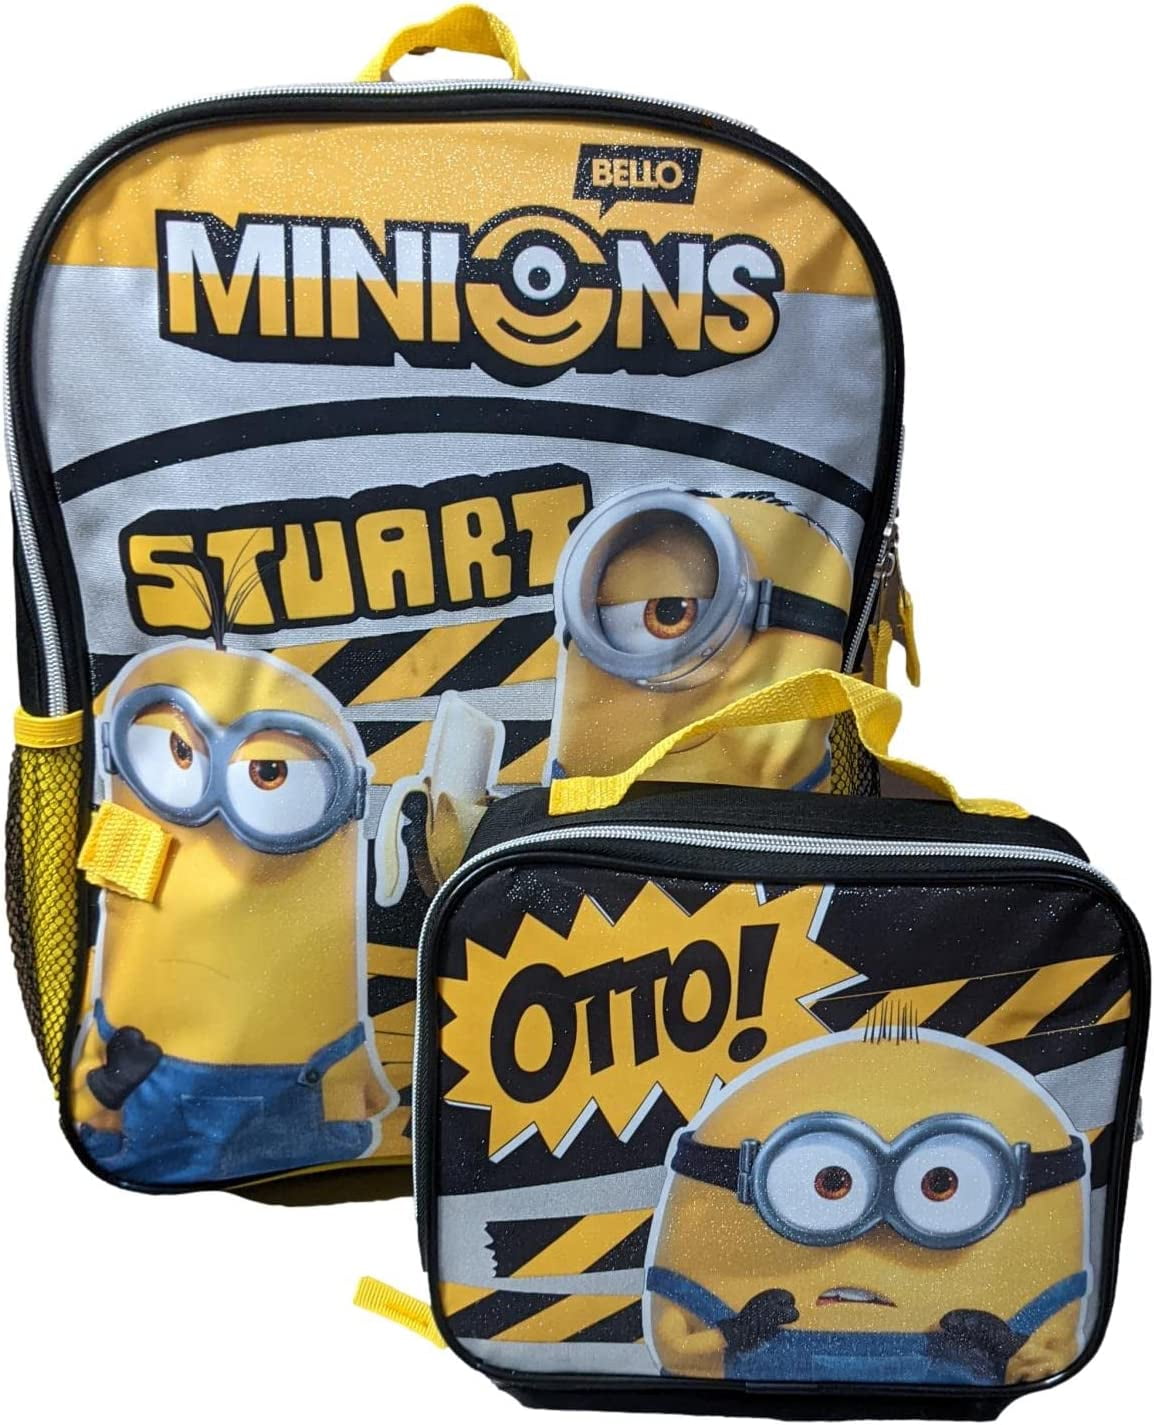 Accessory Innovations Boys or Girls Despicable Me Backpack Set